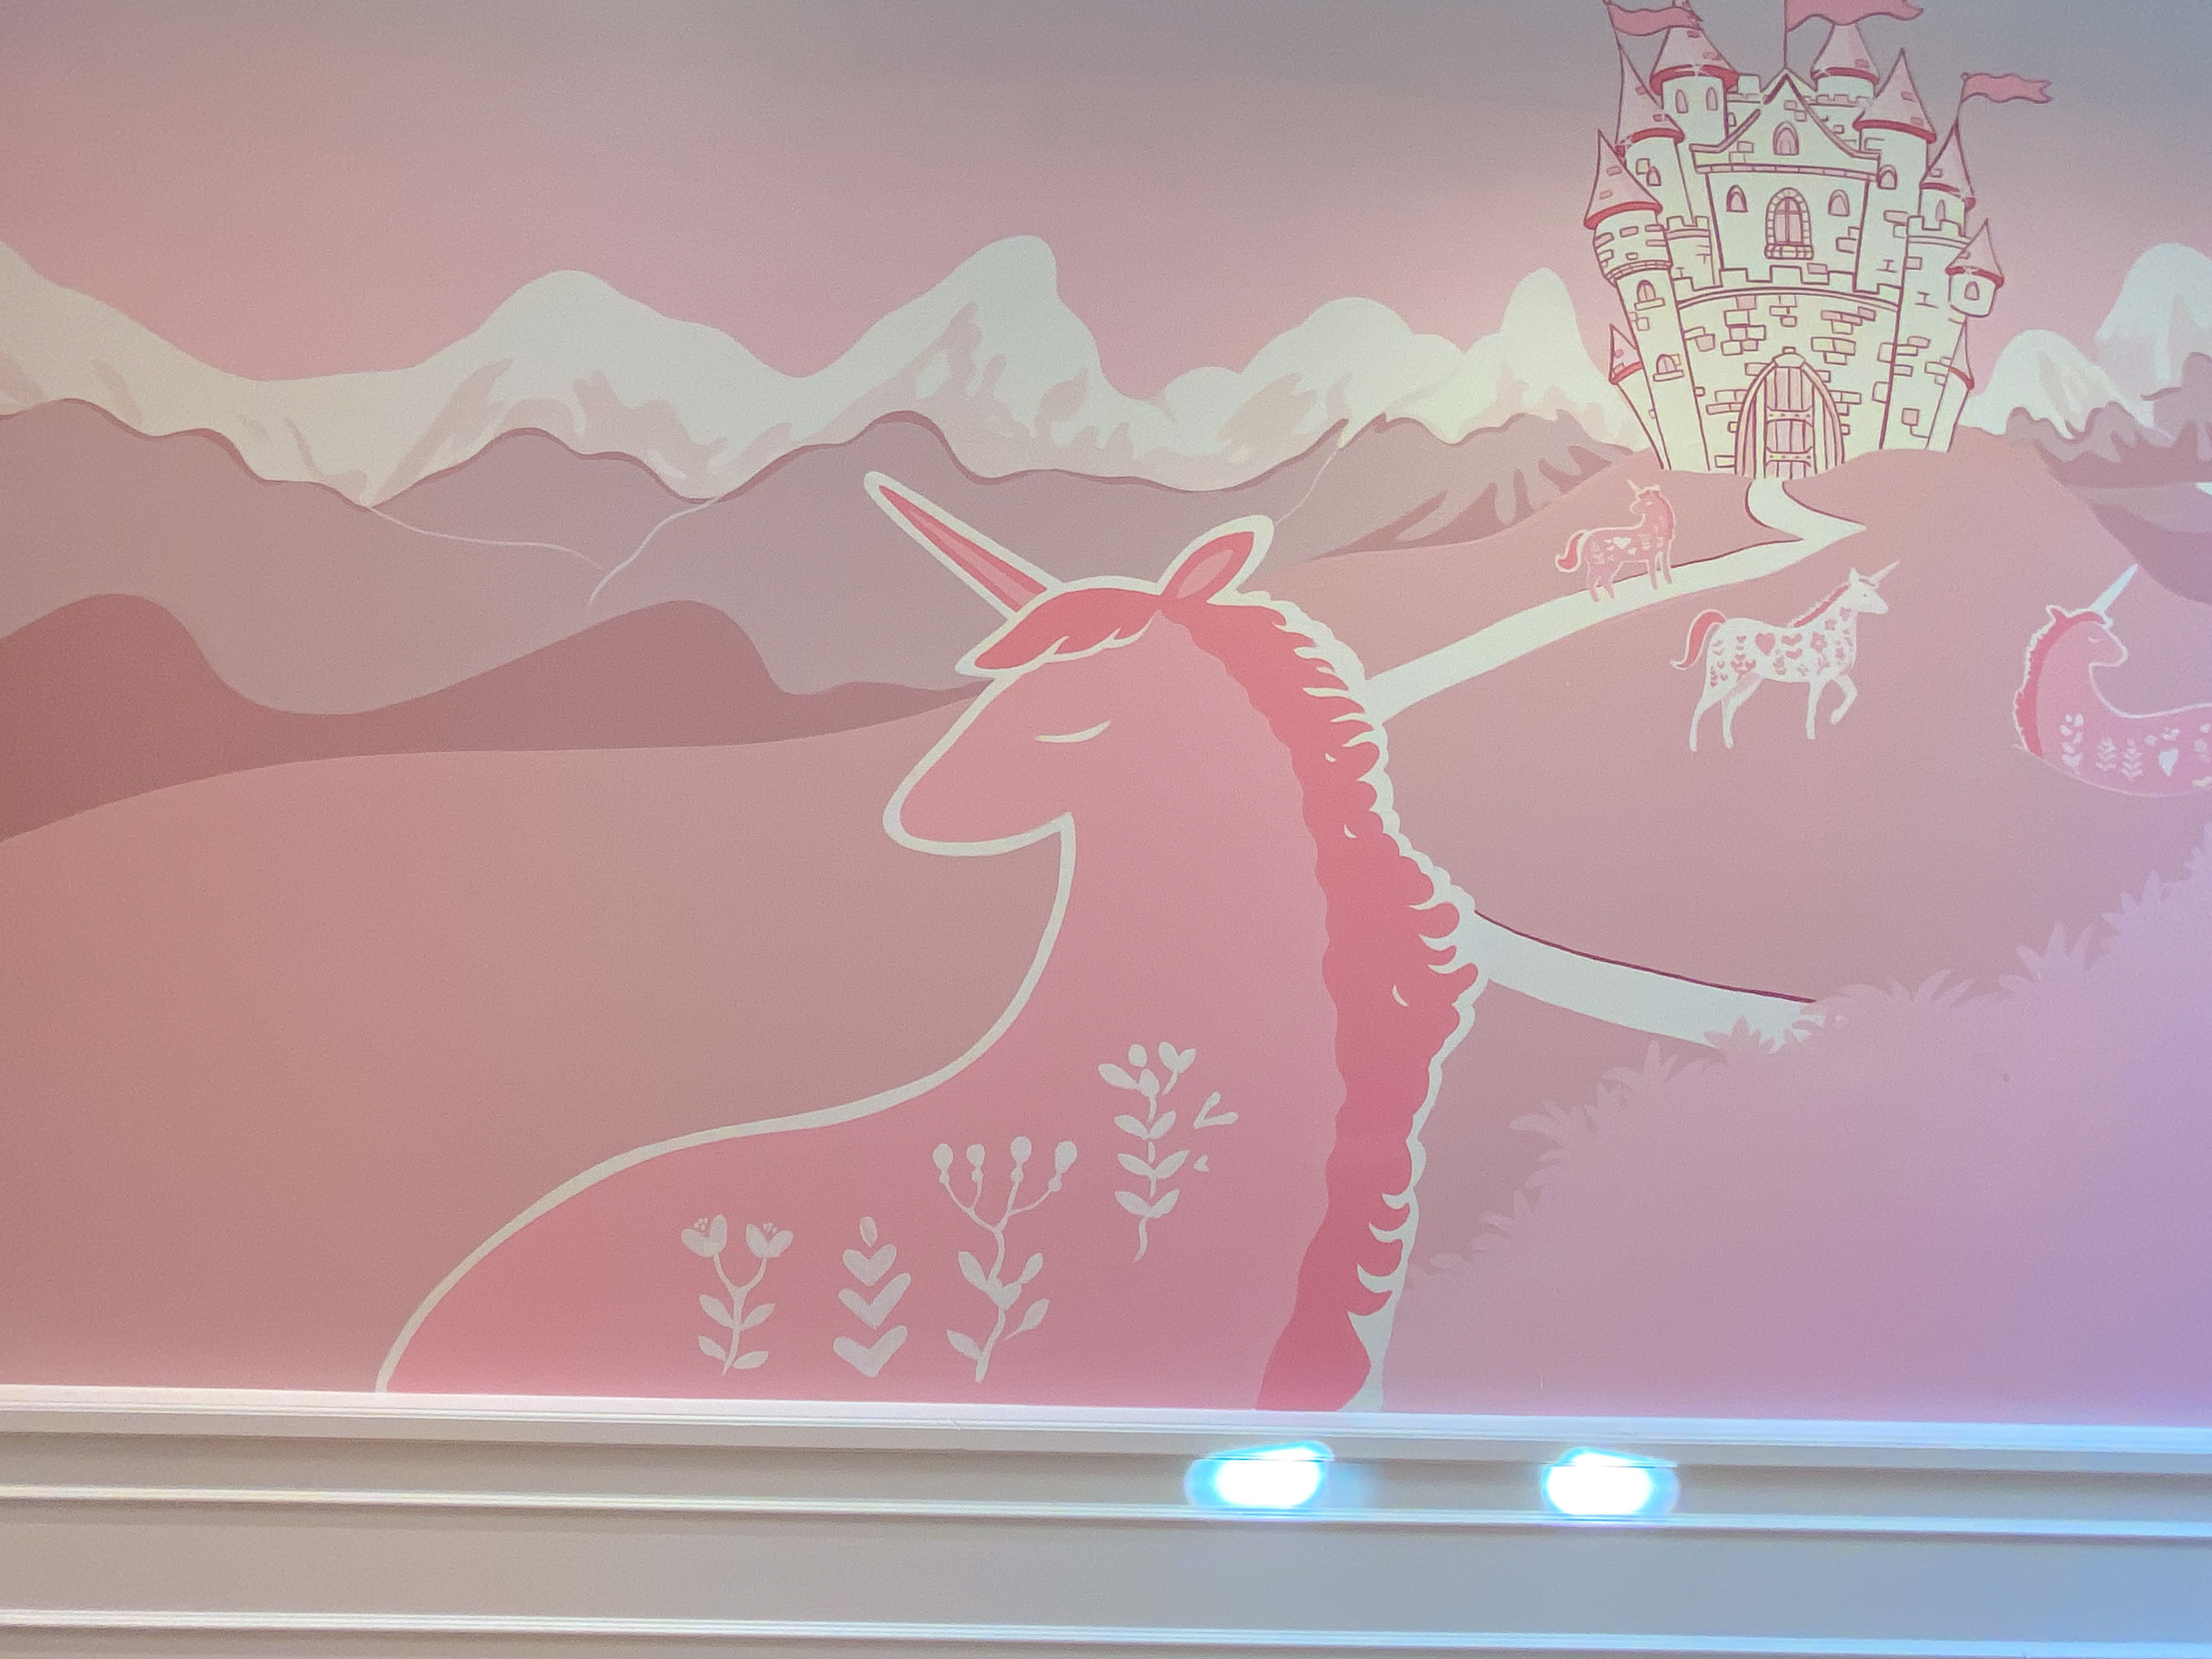 The main stylised unicorn painted in fuller pink tones